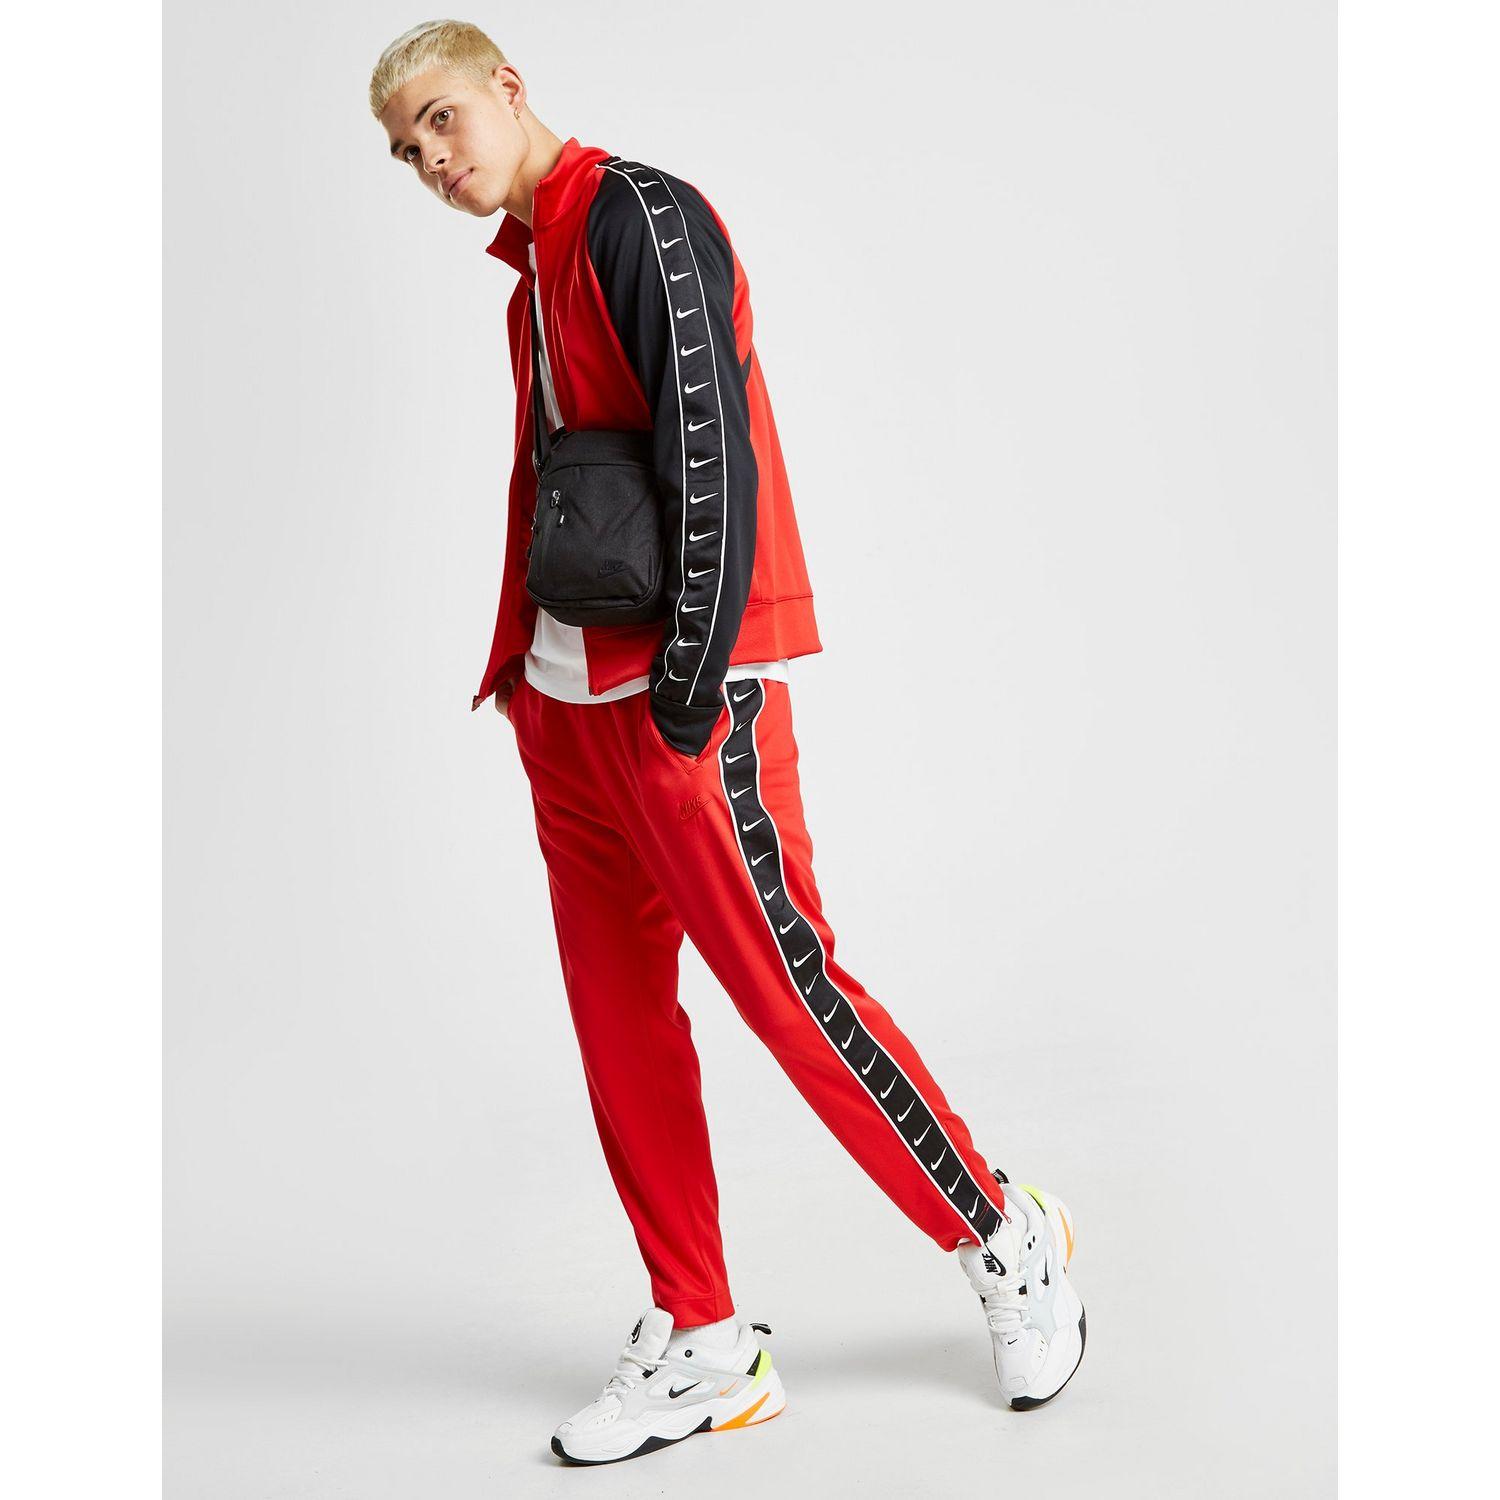 nike tape track pants red Off 71% - www.loverethymno.com